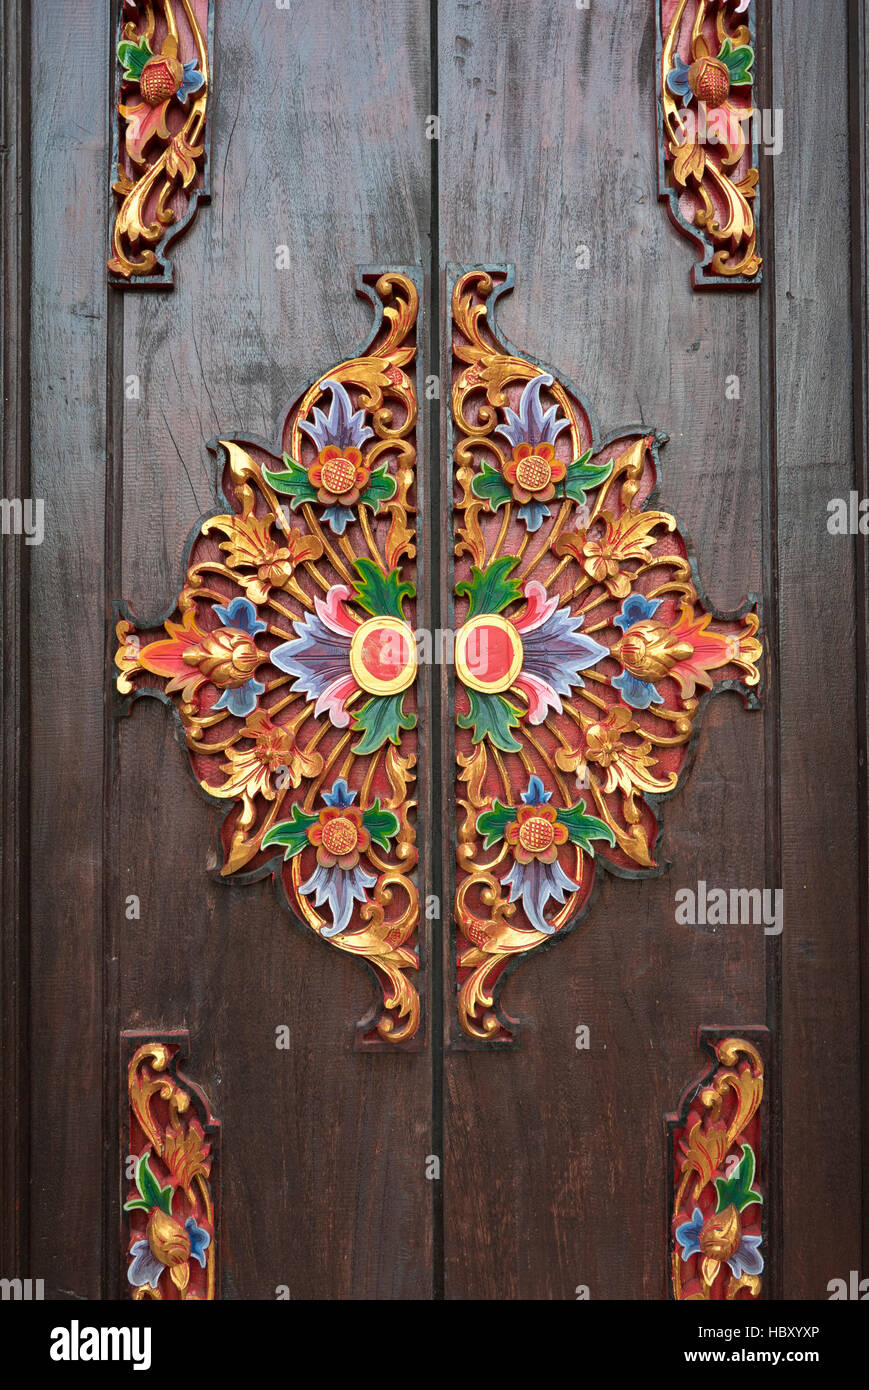 Details of wooden ornate entrance door to temple In Bali. Indonesia Stock Photo